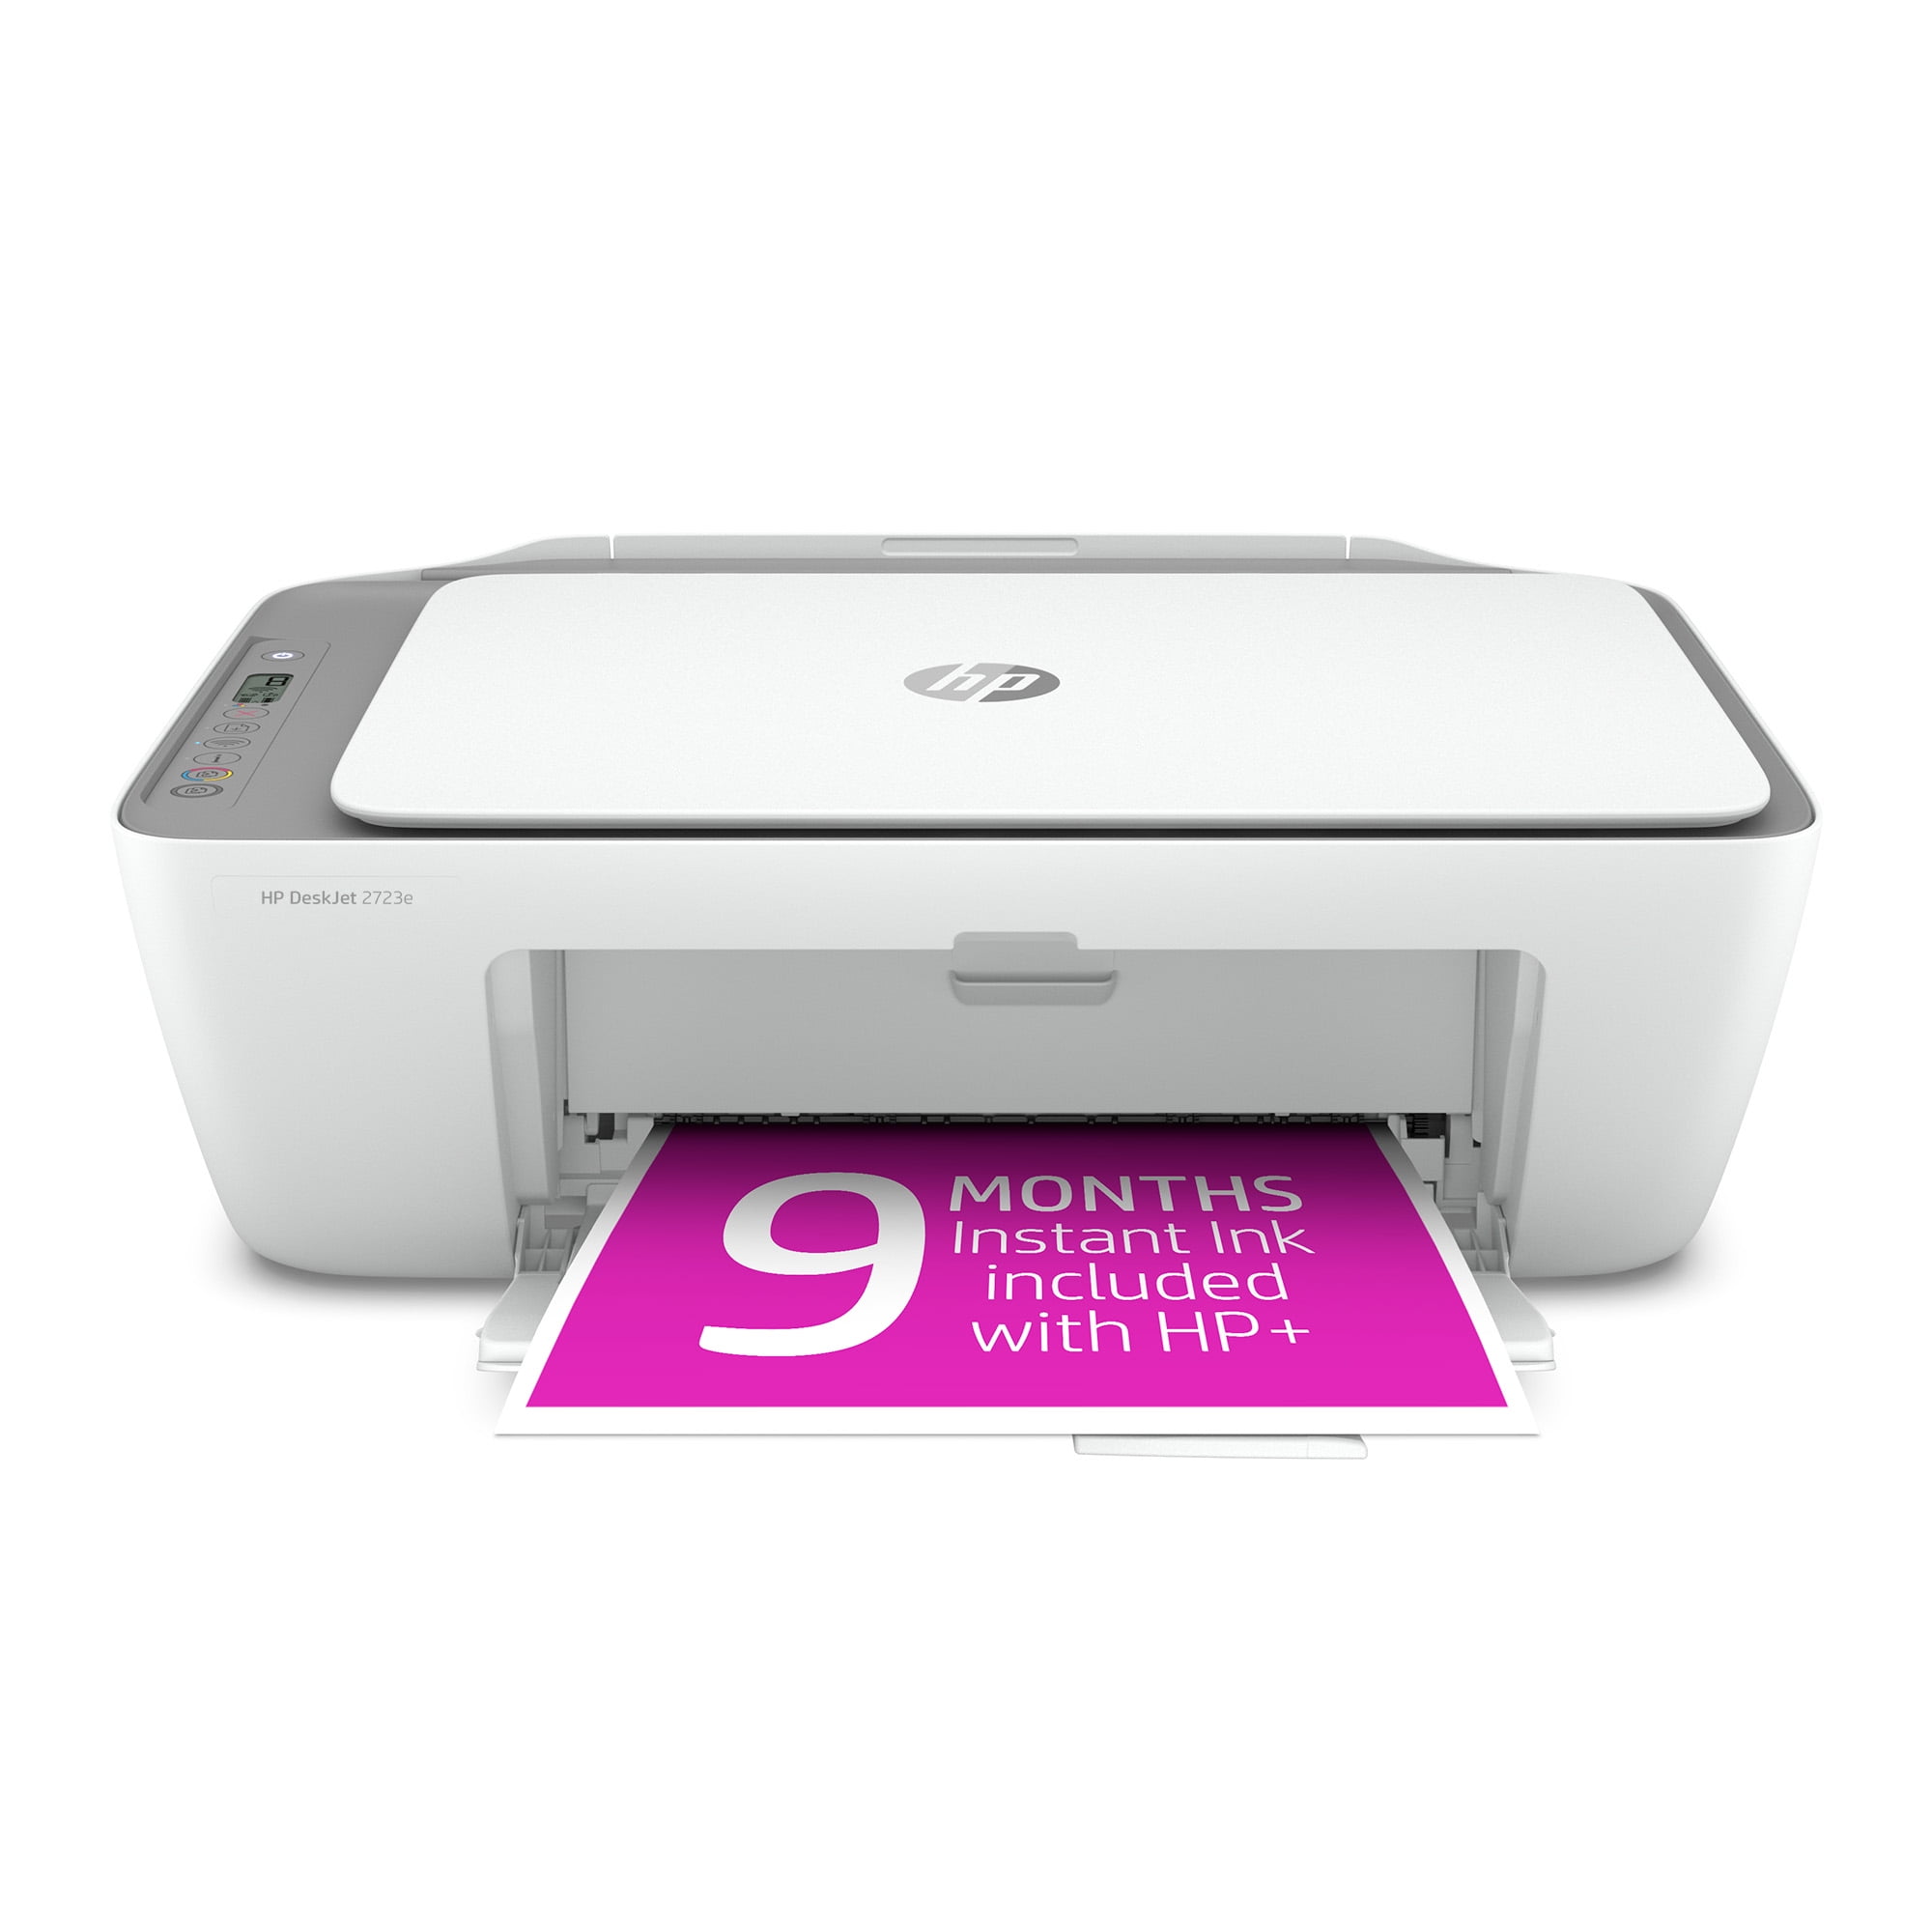 HP DeskJet 2723e All-in-One Wireless Color Inkjet Printer with 9 Months Instant Ink Included with HP+